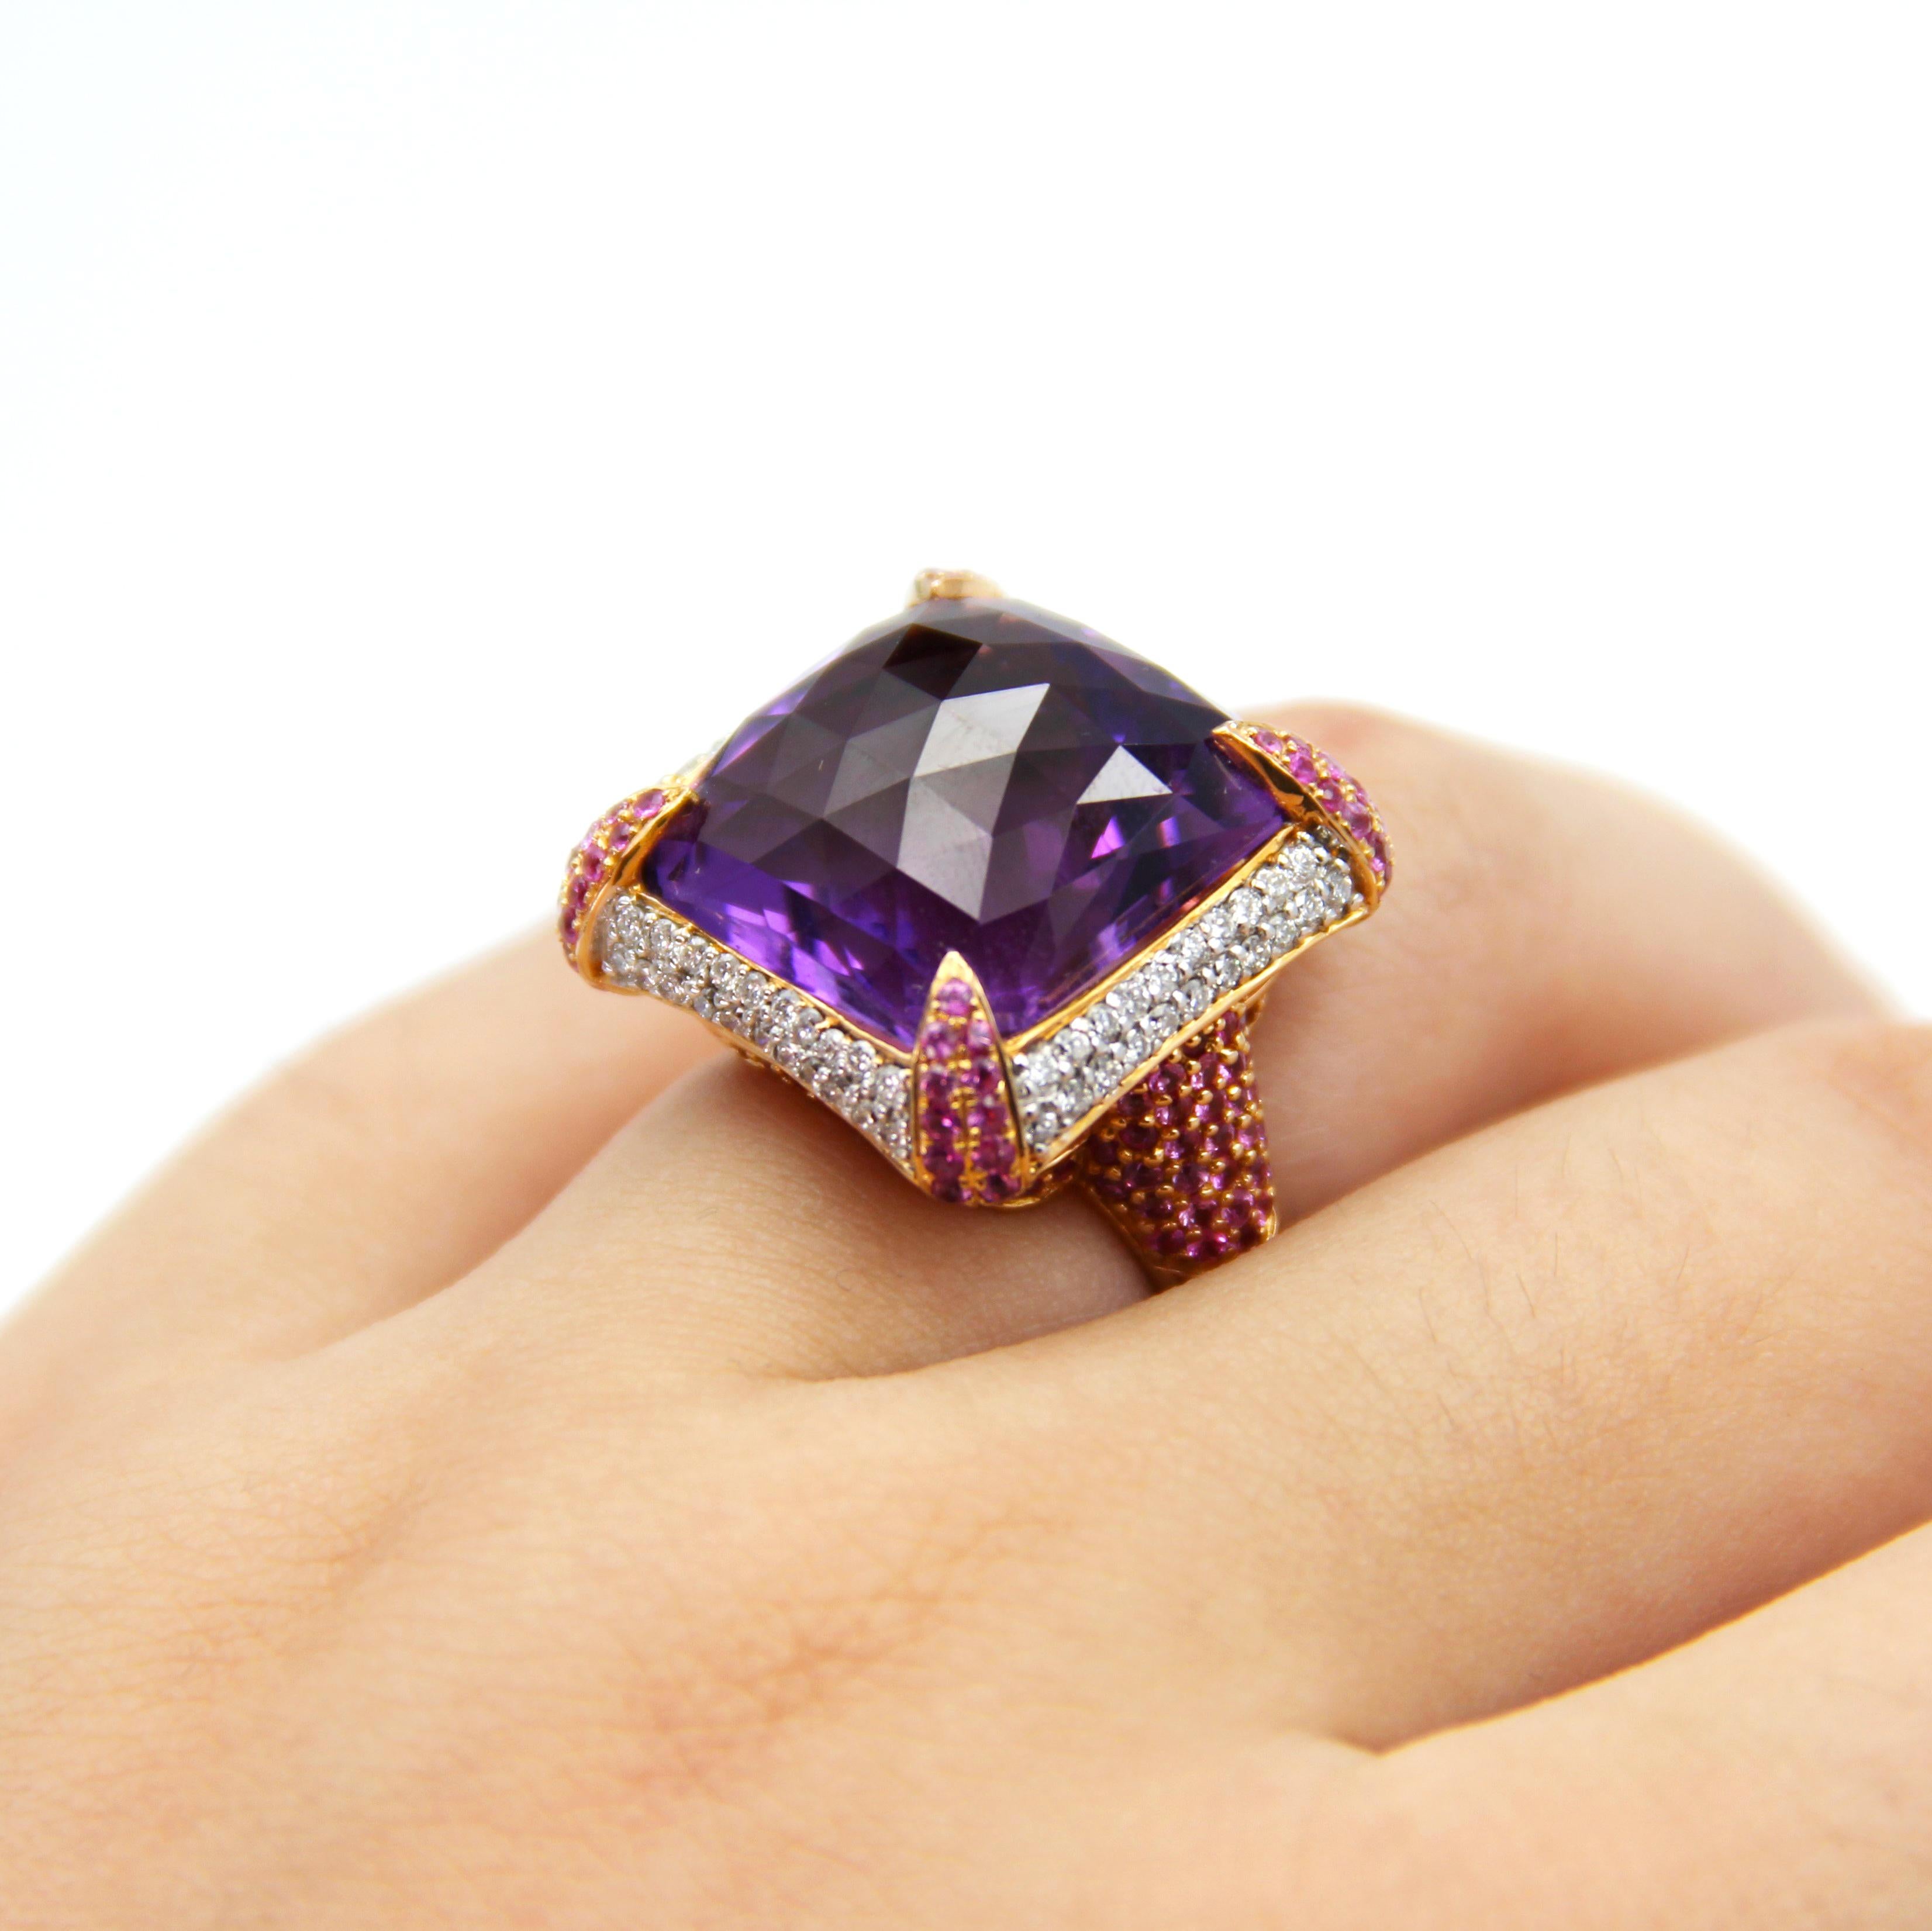 IGSL Certified Amethyst Pink Sapphire Diamond Cocktail Ring For Sale 6